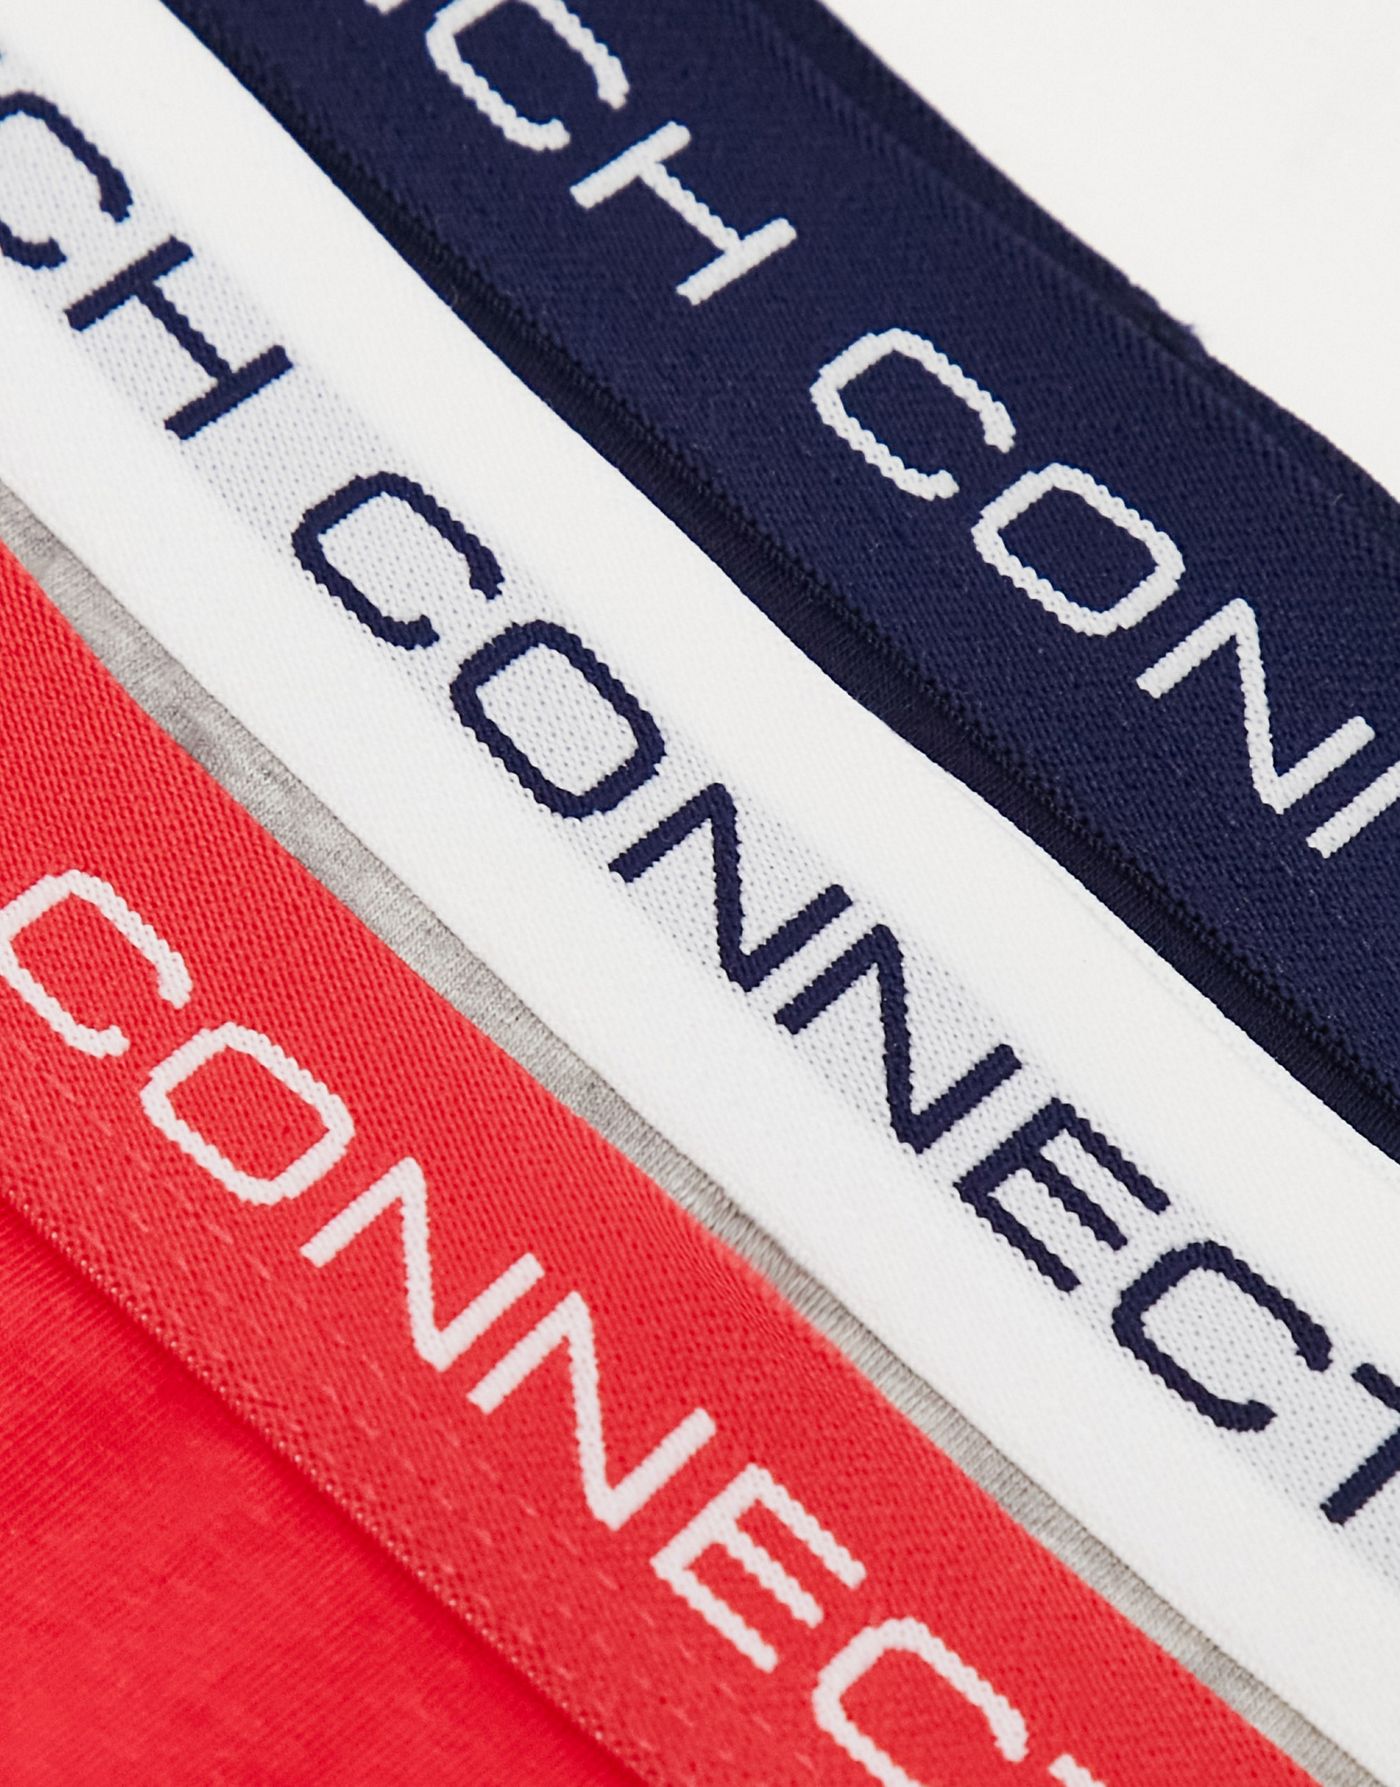 French Connection 3 pack briefs in hibiscus grey and navy